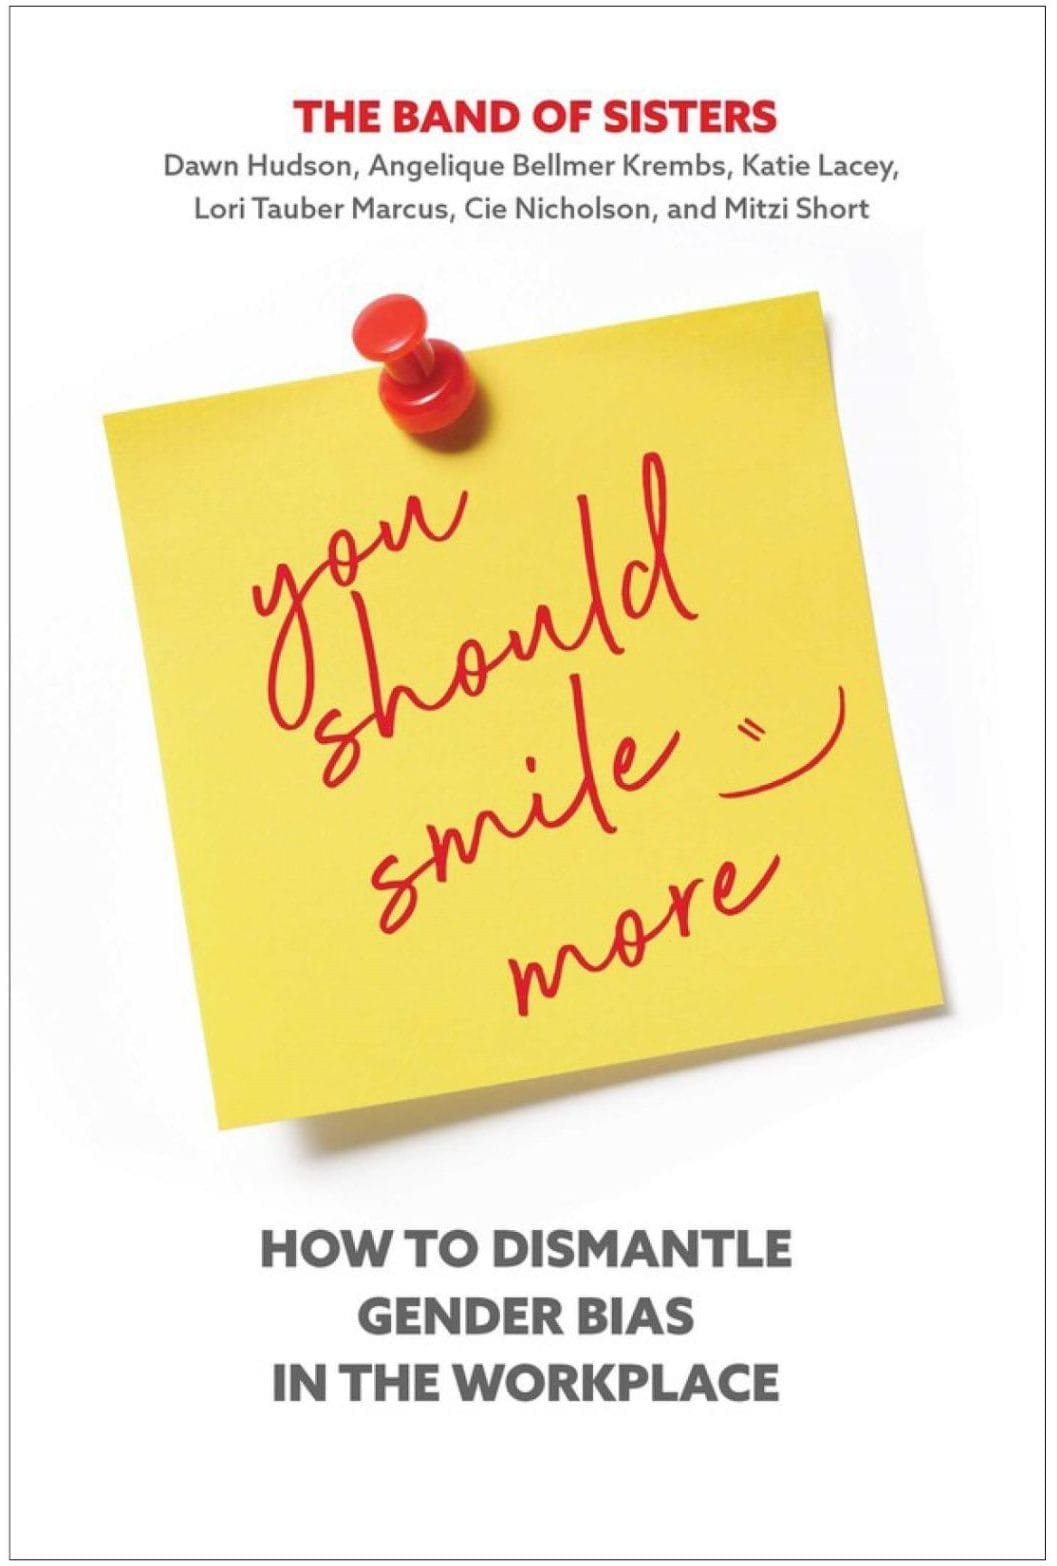 Cover for book titled "You Should Smile More."